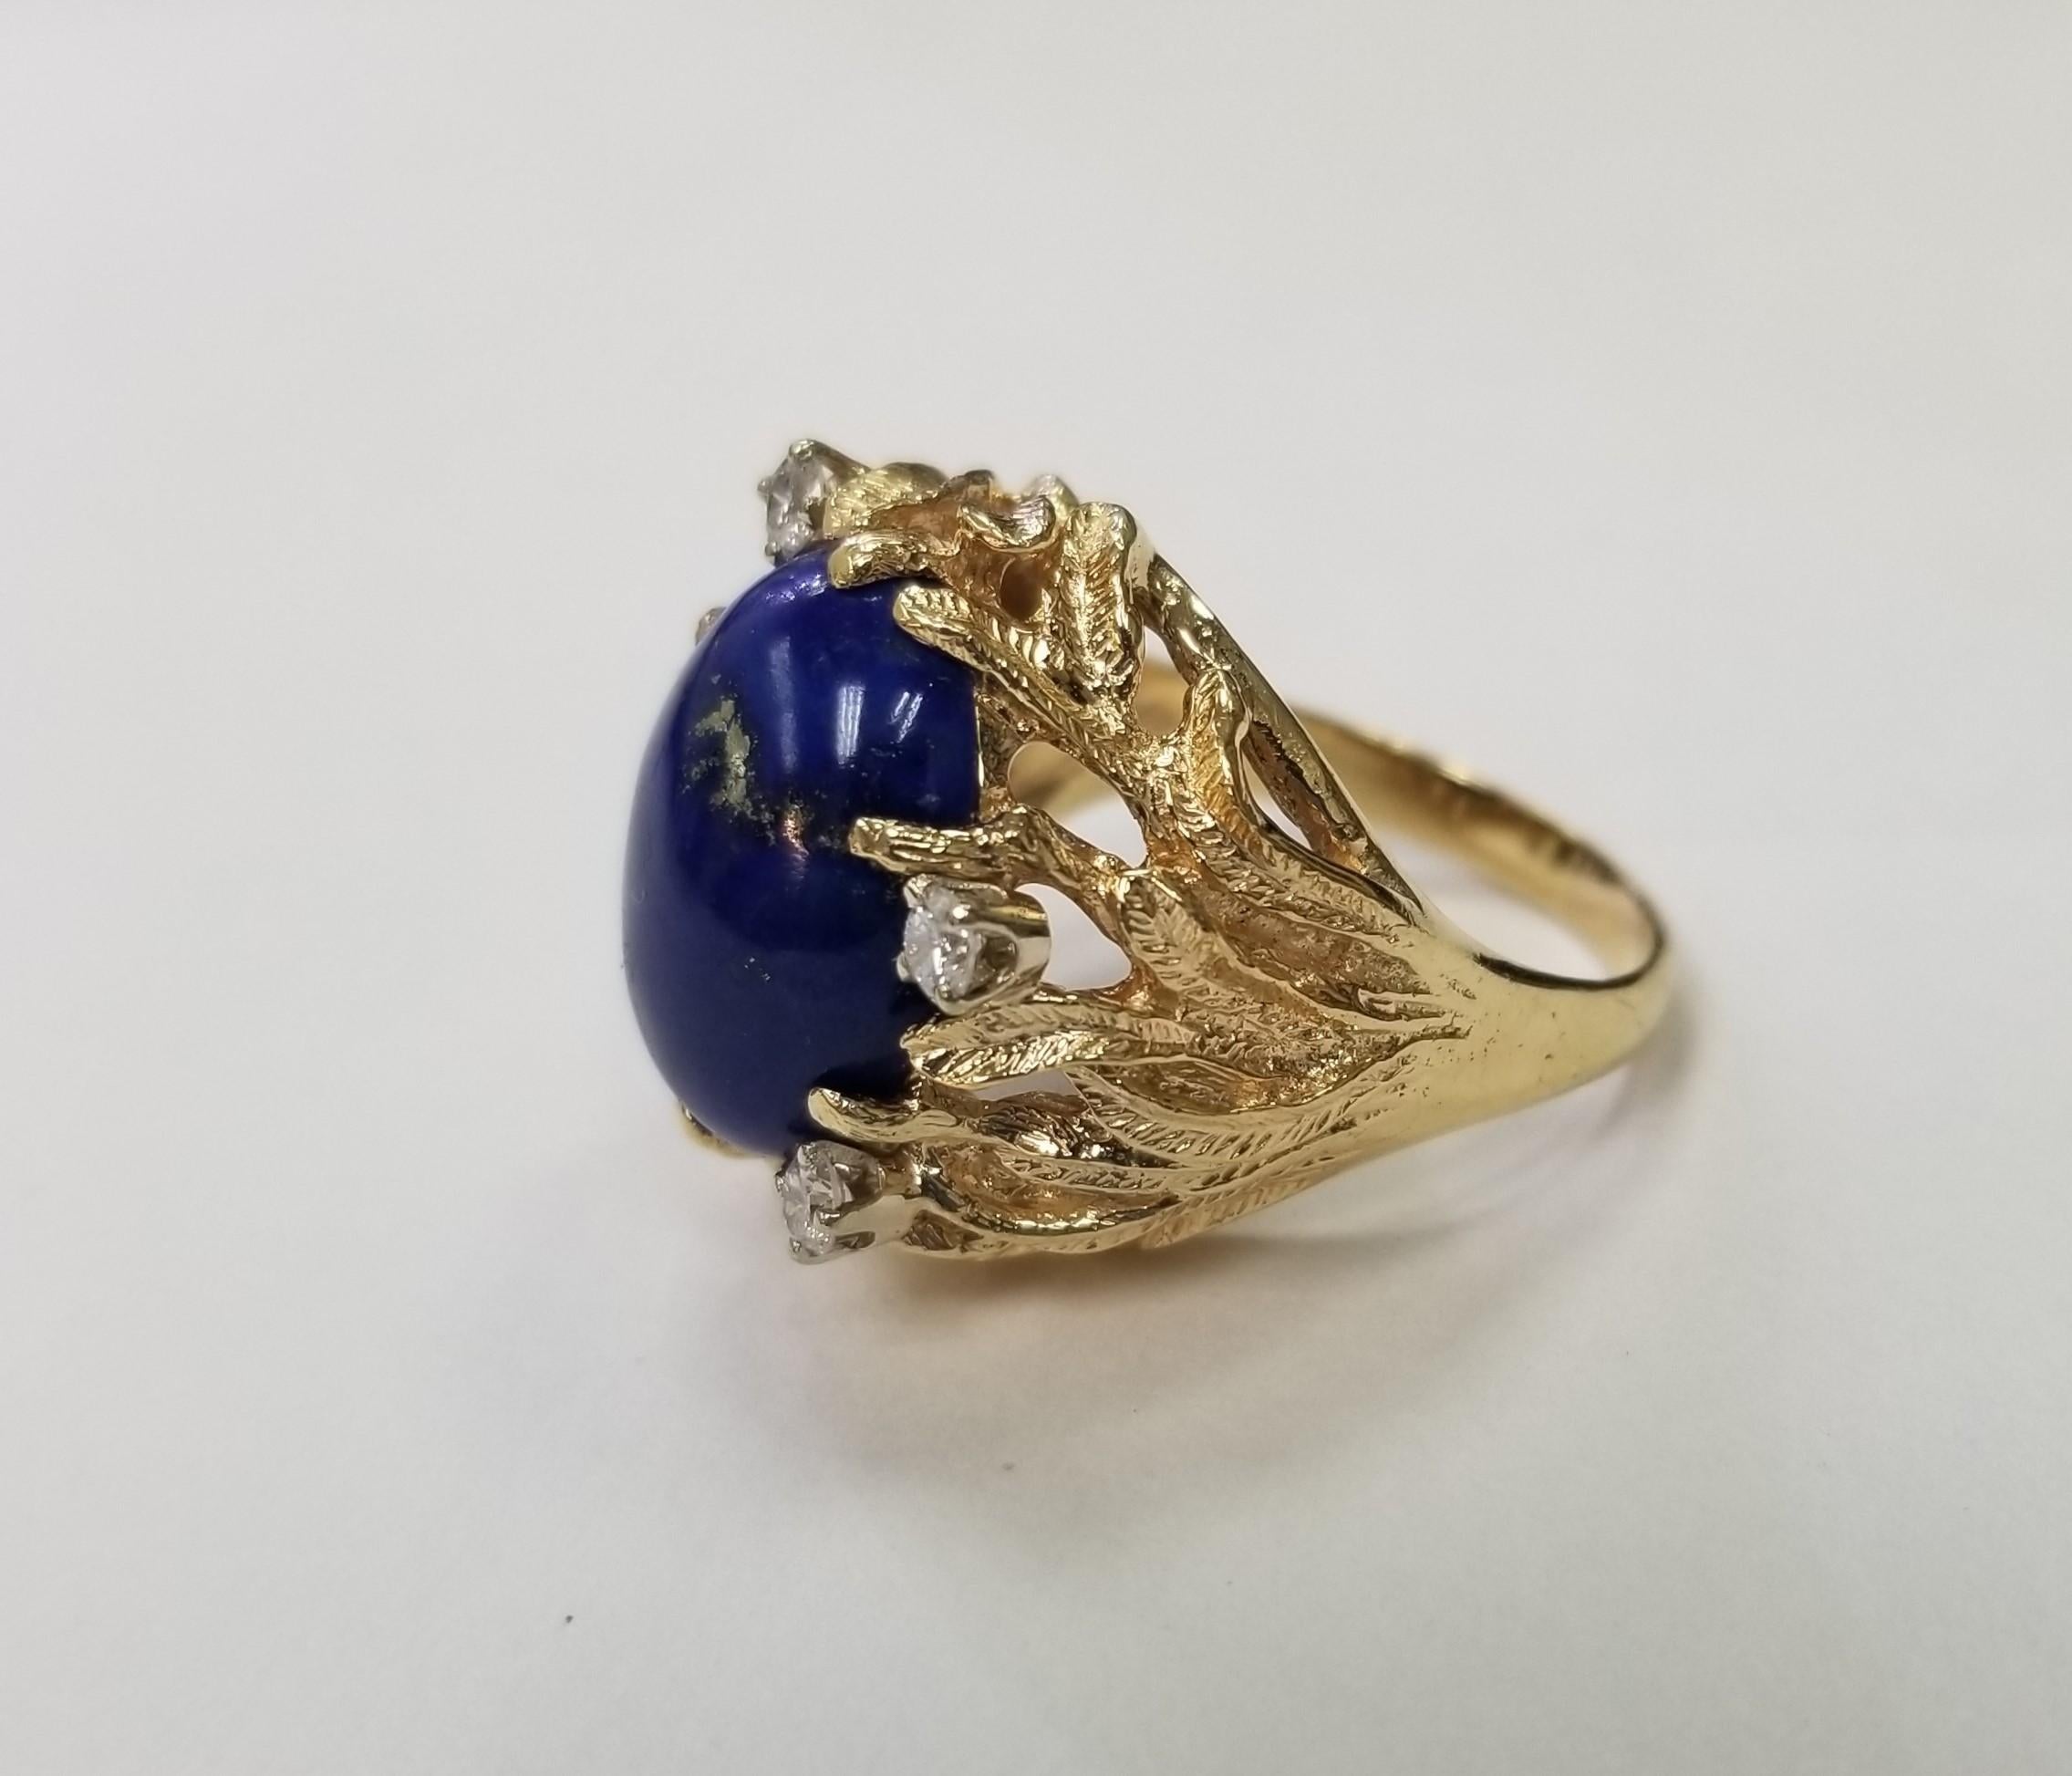 14 Karat Yellow Gold Lapis and Diamond Cocktail Ring, 1 Lapis 15 x 12mm of gem quality and 4 round full cut diamonds of very fine quality weighing .20pts.  This ring is a size 7.5 but we will size to fit for free.
